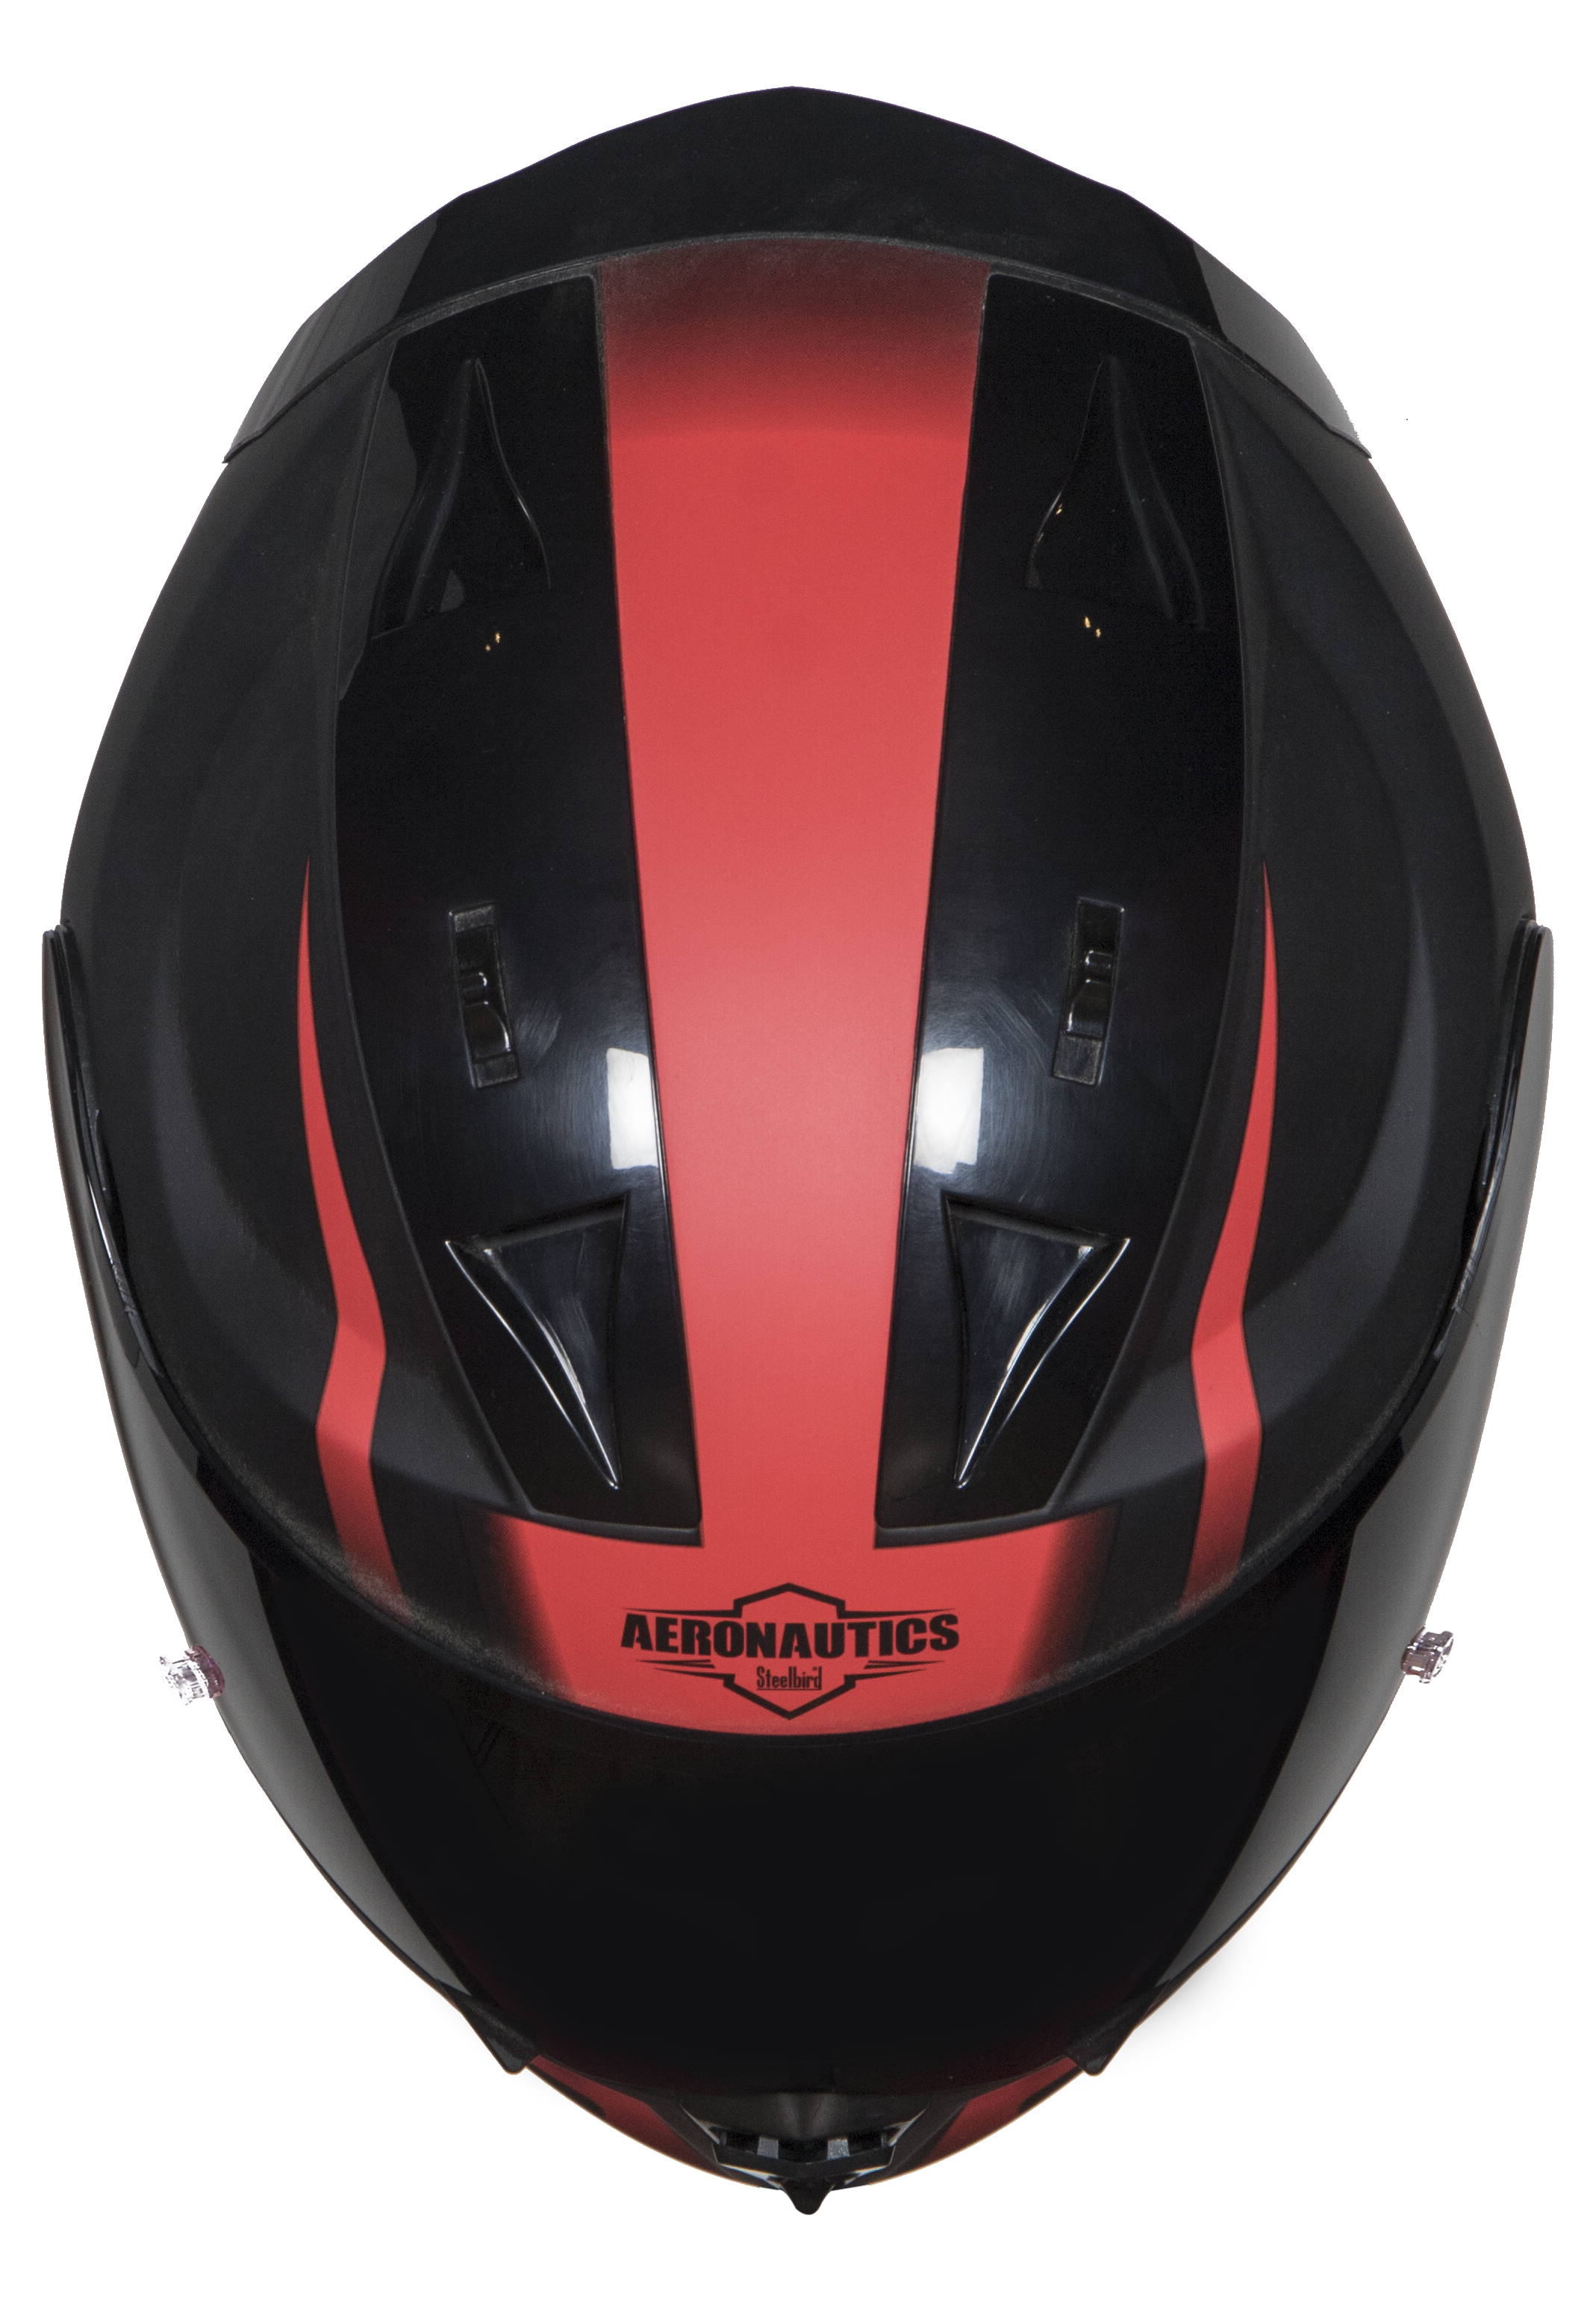 SA-1 WHIF Mat Black/Red (Fitted With Clear Visor Extra Anti-Fog Shield Chrome Gold Visor Free)